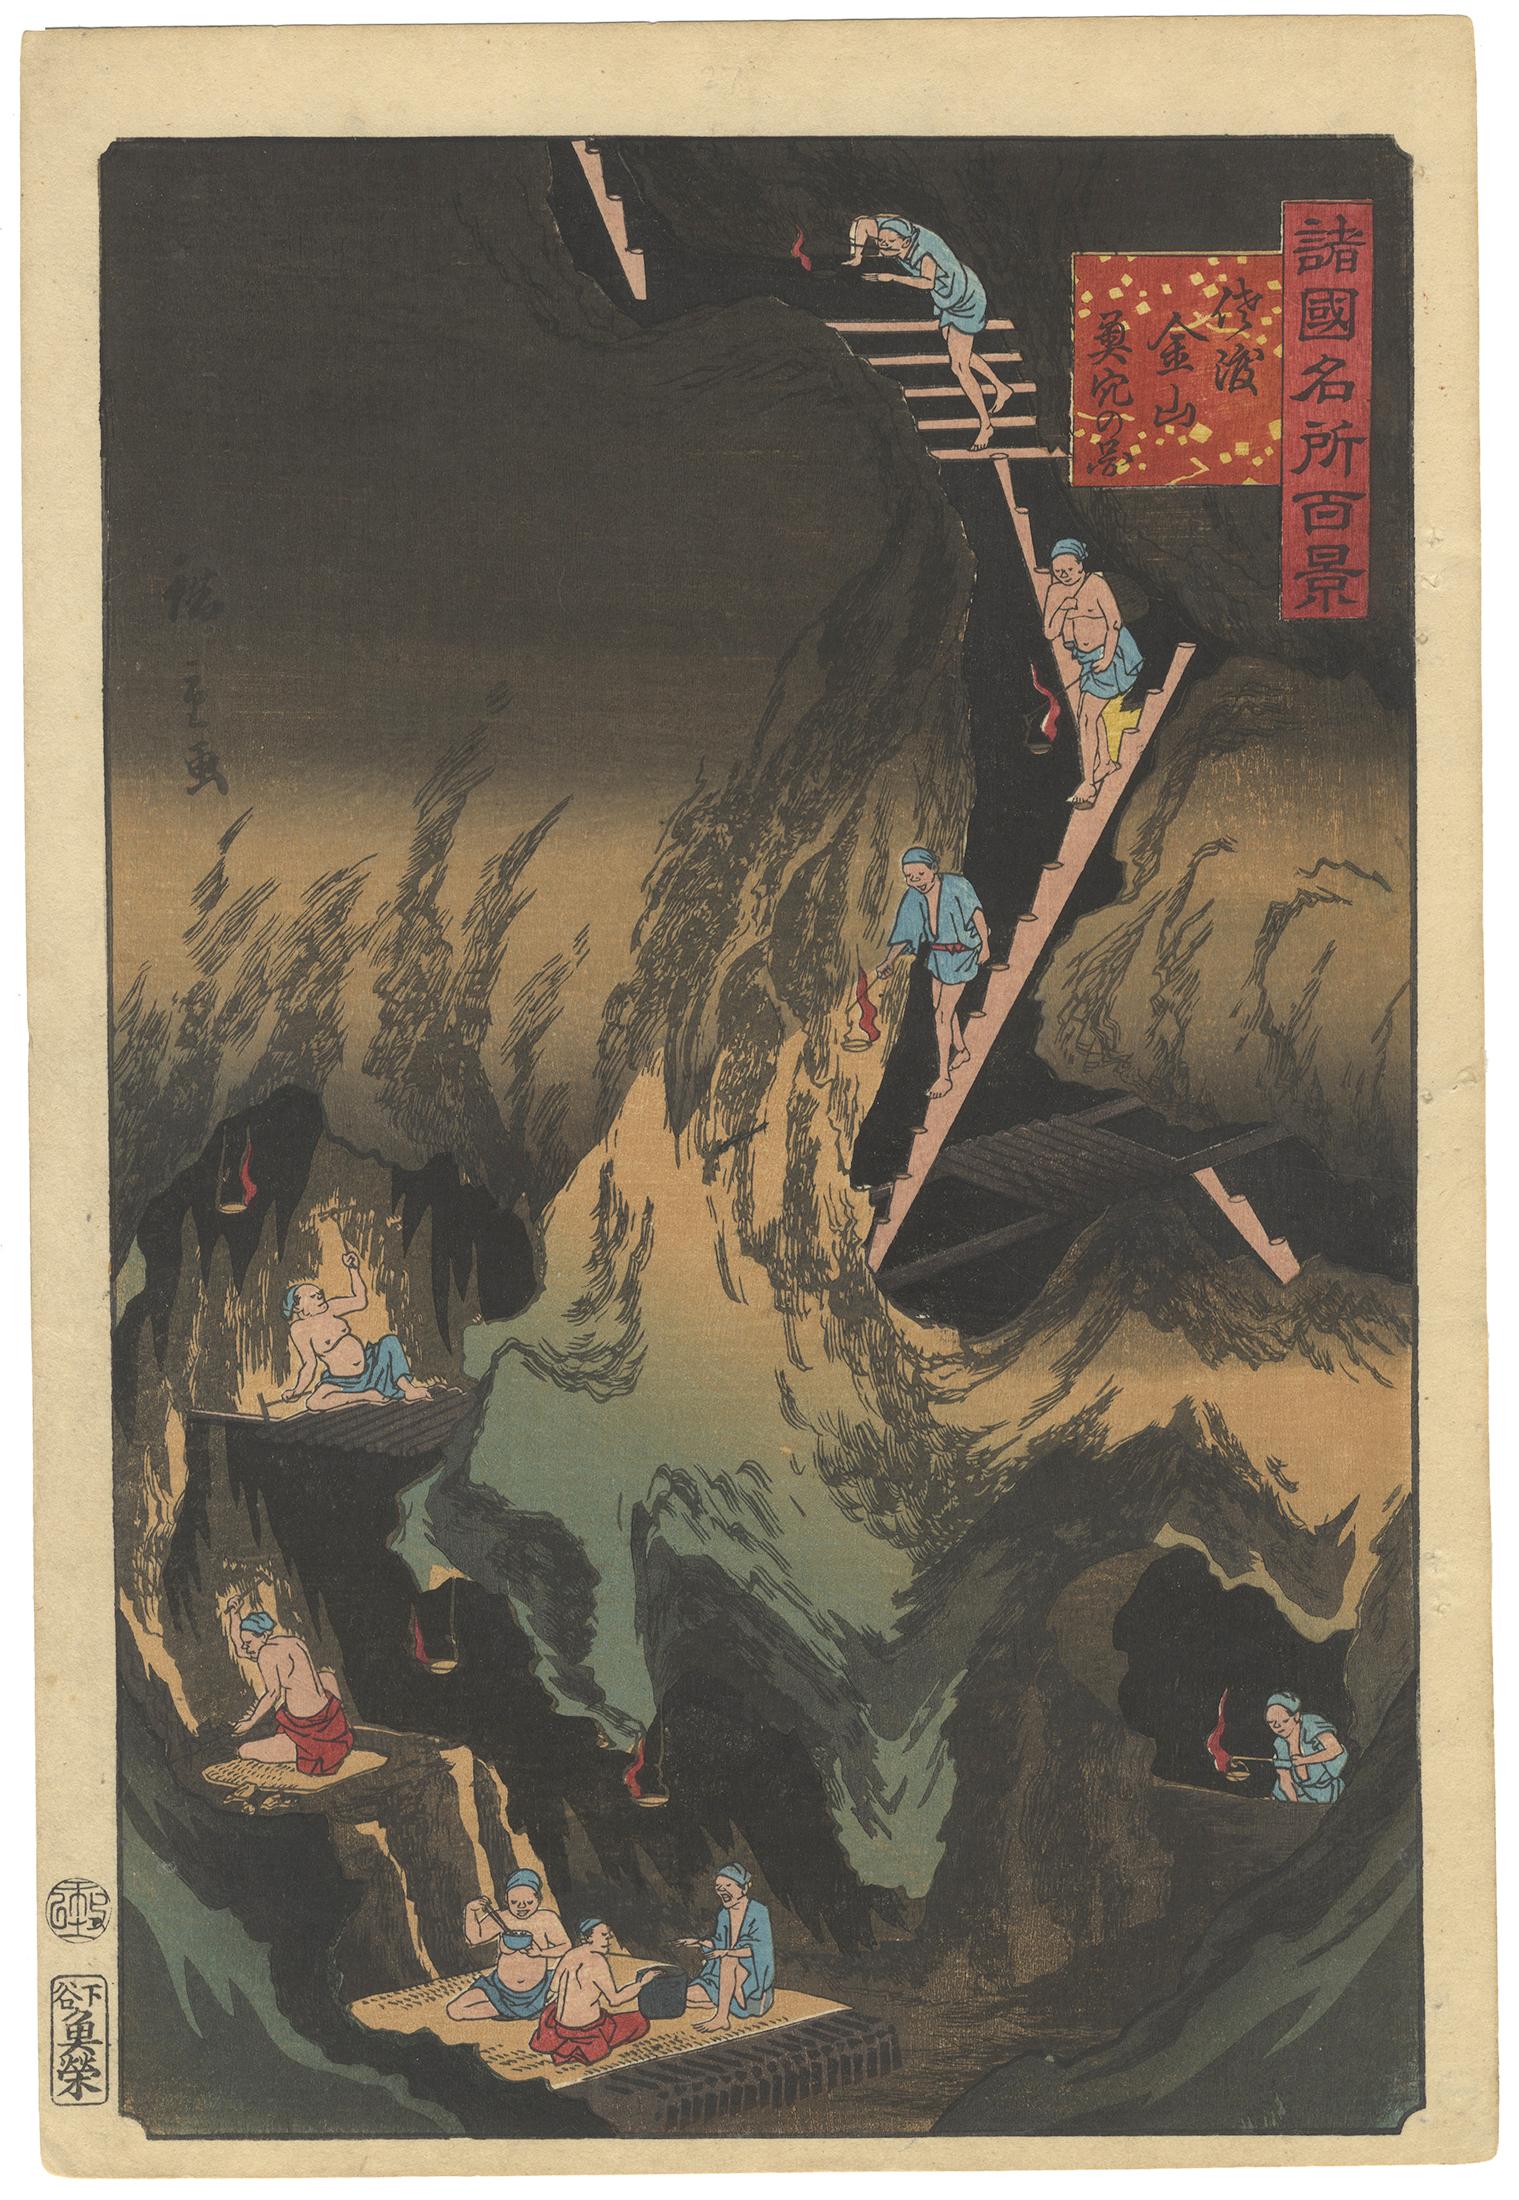 Artist: Utagawa Hiroshige II (1826 – 1869)
Title: 54. Inside of Gold Mine, Sado Island
Series: One Hundred Famous Views of Provinces
Publisher: Uoya Eikichi
Date: 1859
Condition report: Backed, additional backing on the binding holes on the right